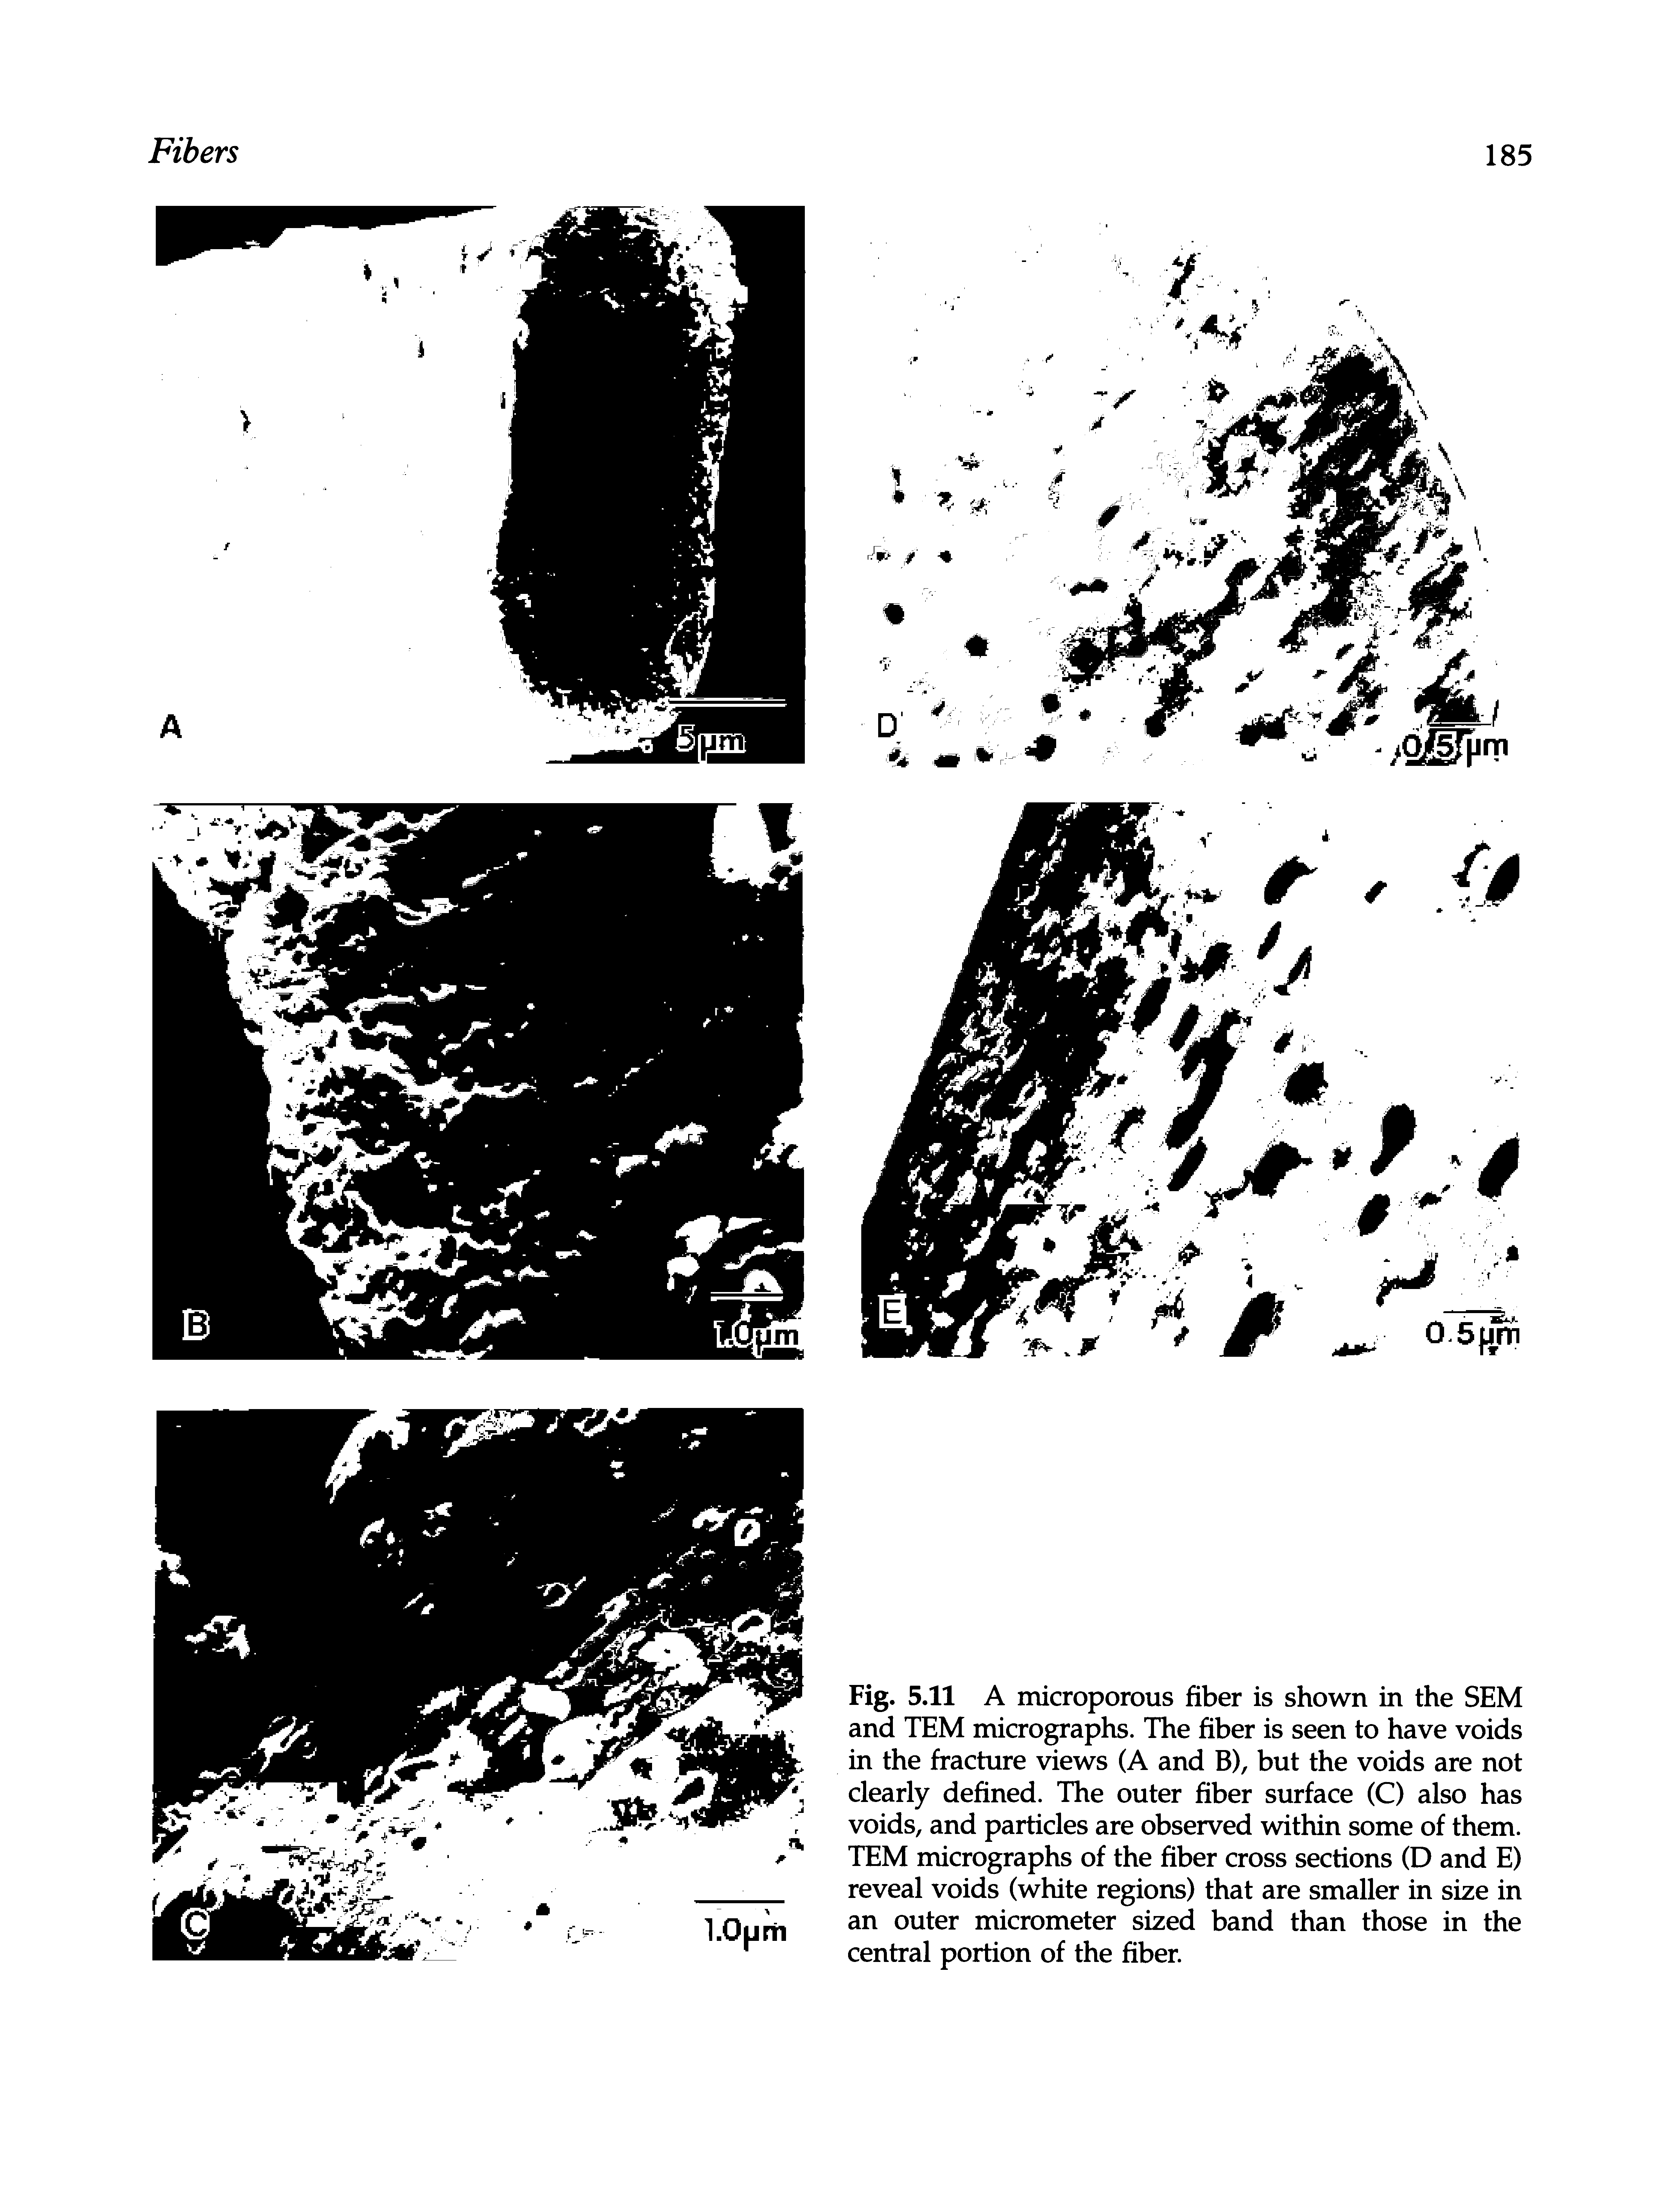 Fig. 5.11 A microporous fiber is shown in the SEM and TEM micrographs. The fiber is seen to have voids in the fracture views (A and B), but the voids are not clearly defined. The outer fiber surface (C) also has voids, and particles are observed within some of them. TEM micrographs of the fiber cross sections (D and E) reveal voids (white regions) that are smaller in size in an outer micrometer sized band than those in the central portion of the fiber.